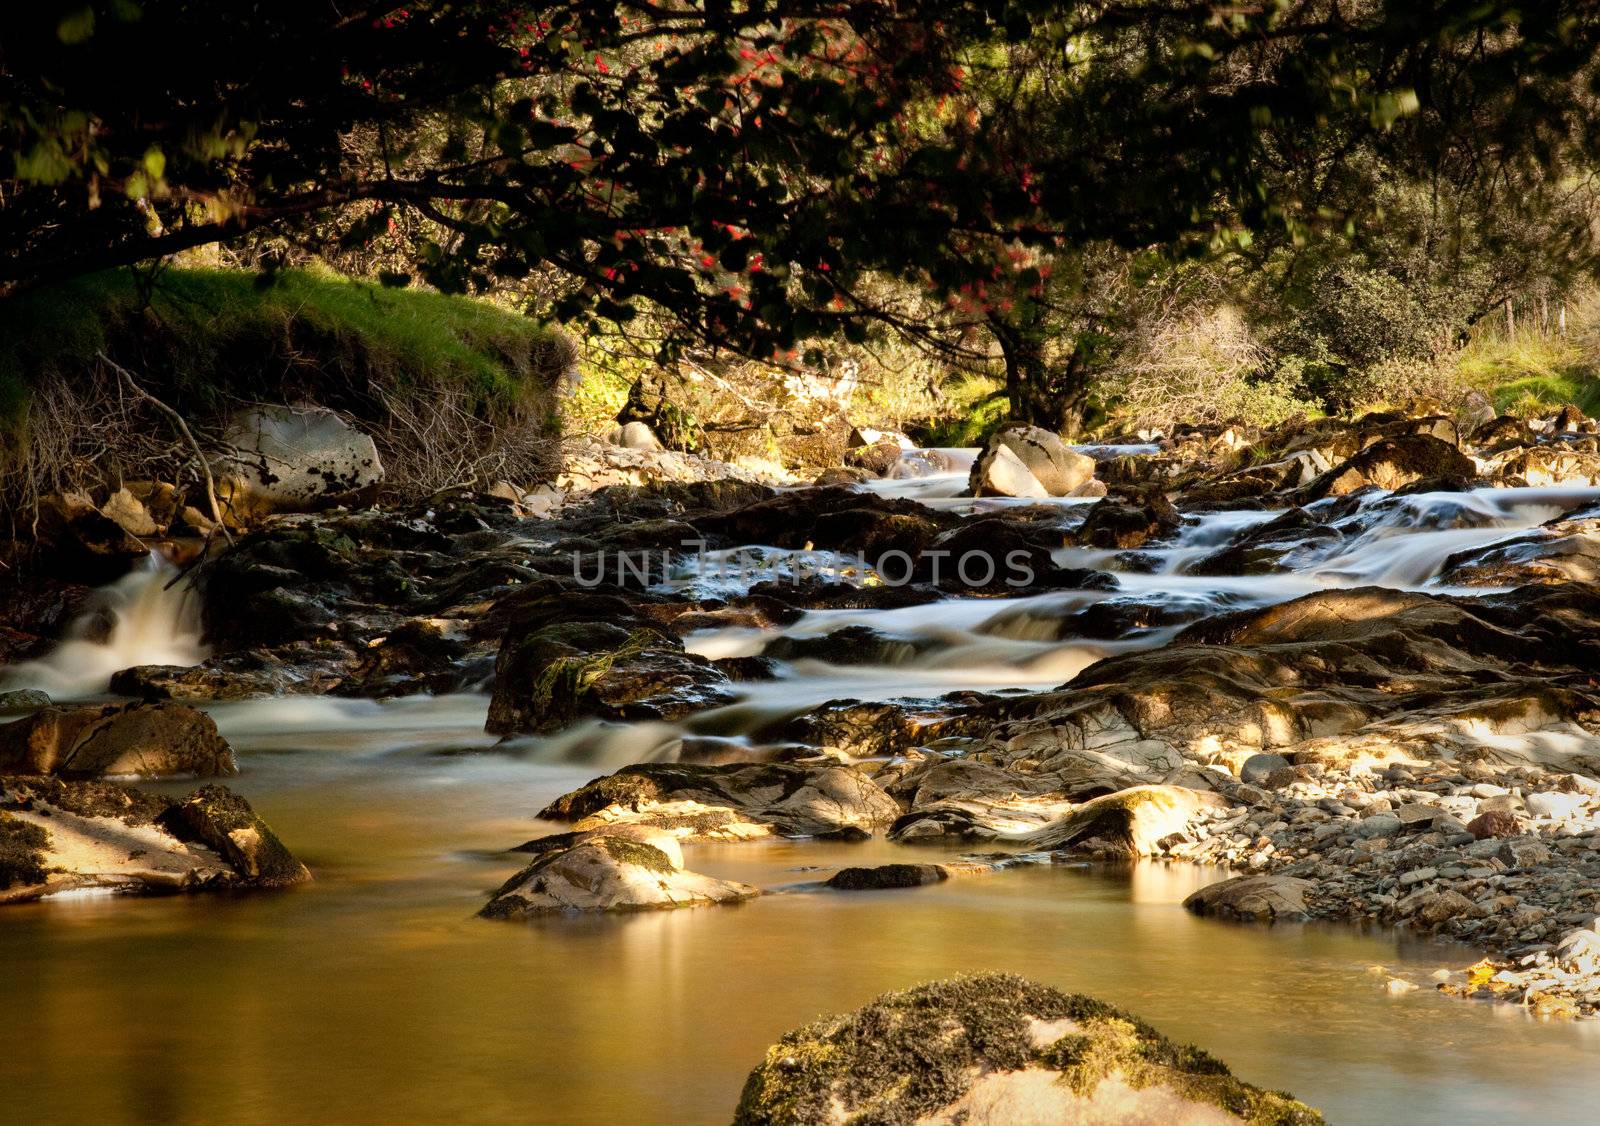 Peat laden river in secluded Welsh Valley by steheap